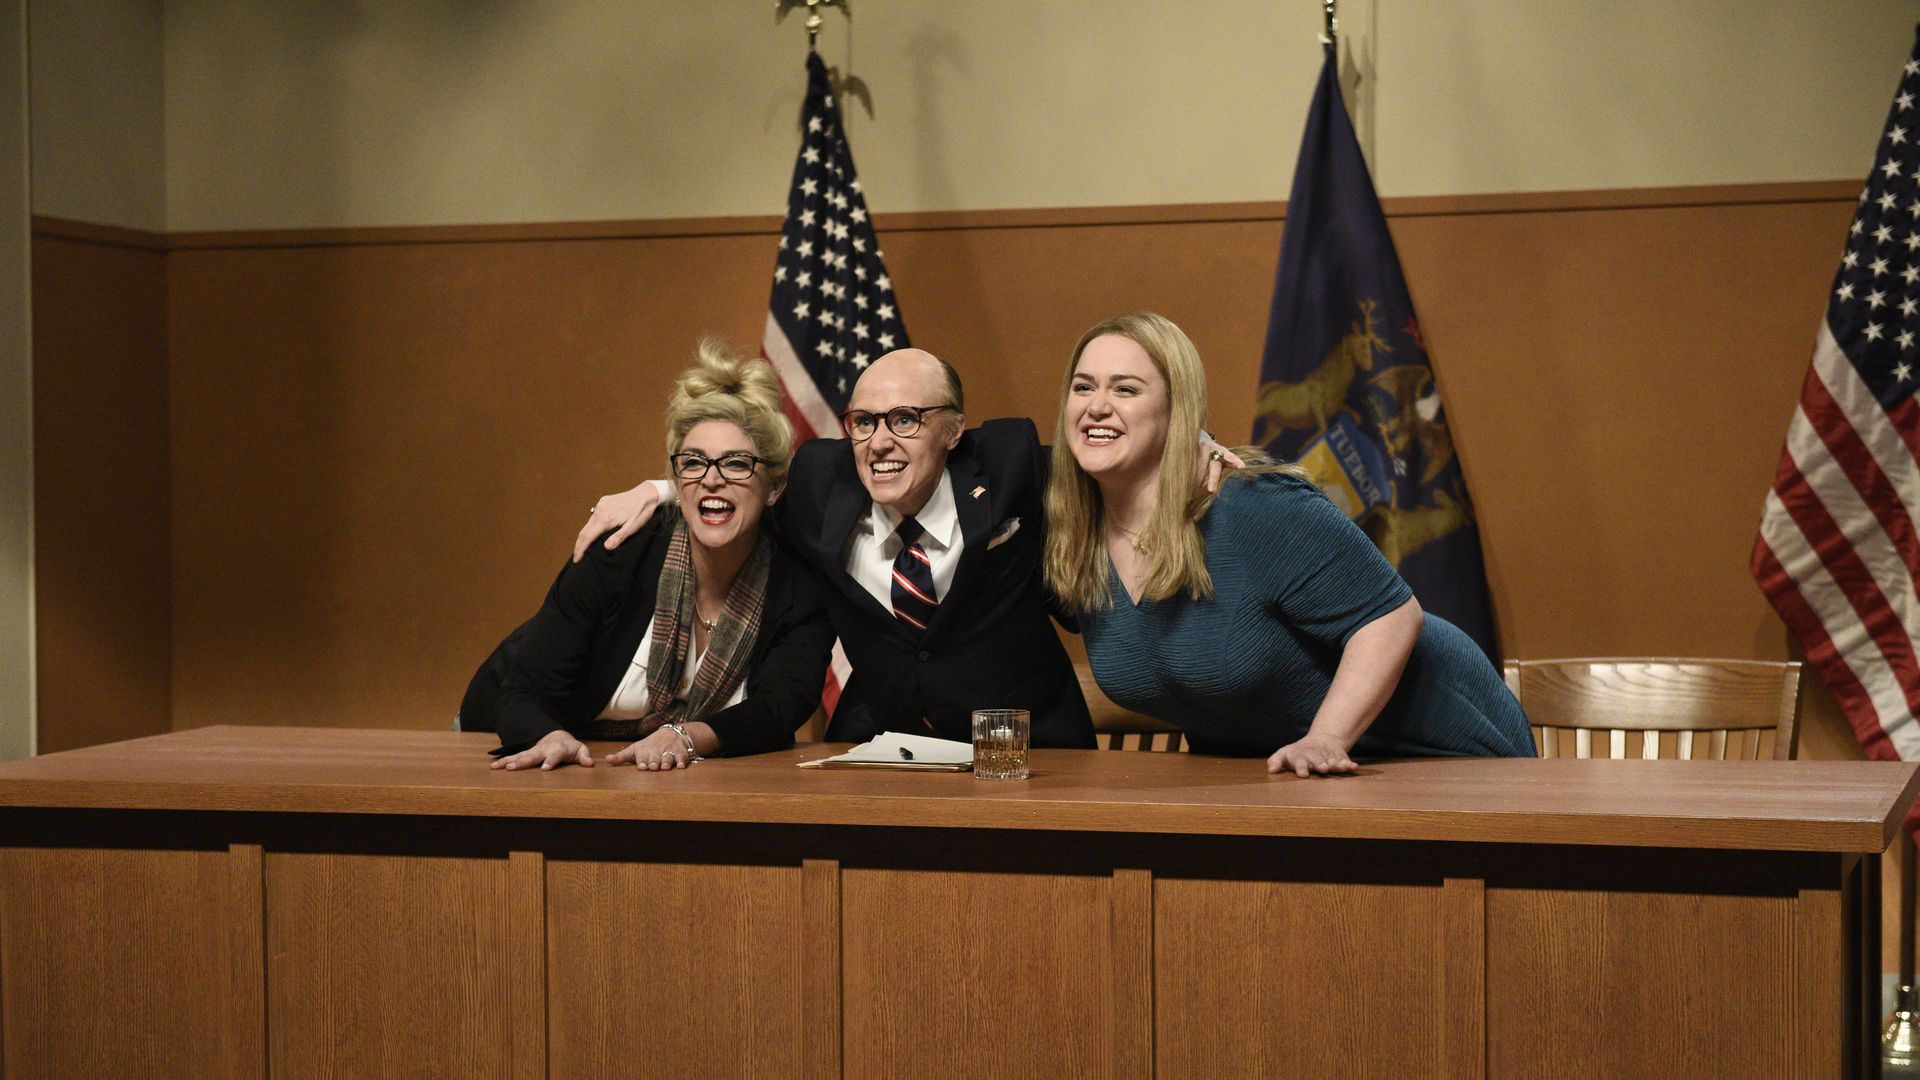 A photo of the NBC cast parodying the Michigan state legislature hearing on Rudy Giuliani's baseless election claims.